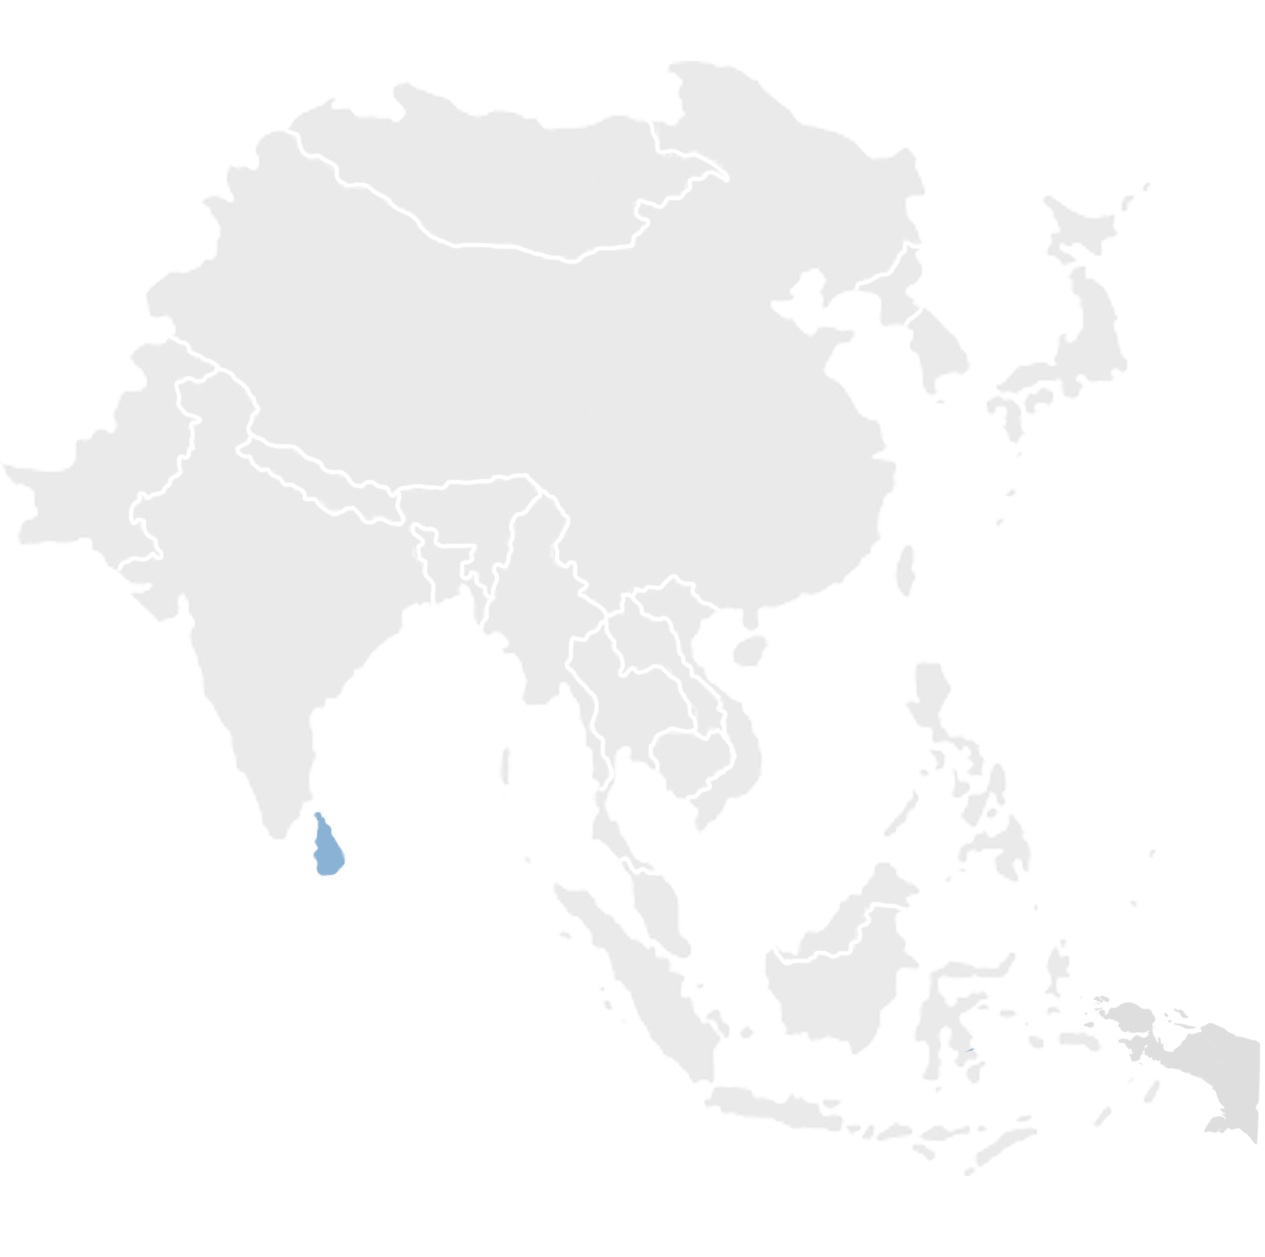 Gray map of Asia with Sri Lanka in blue